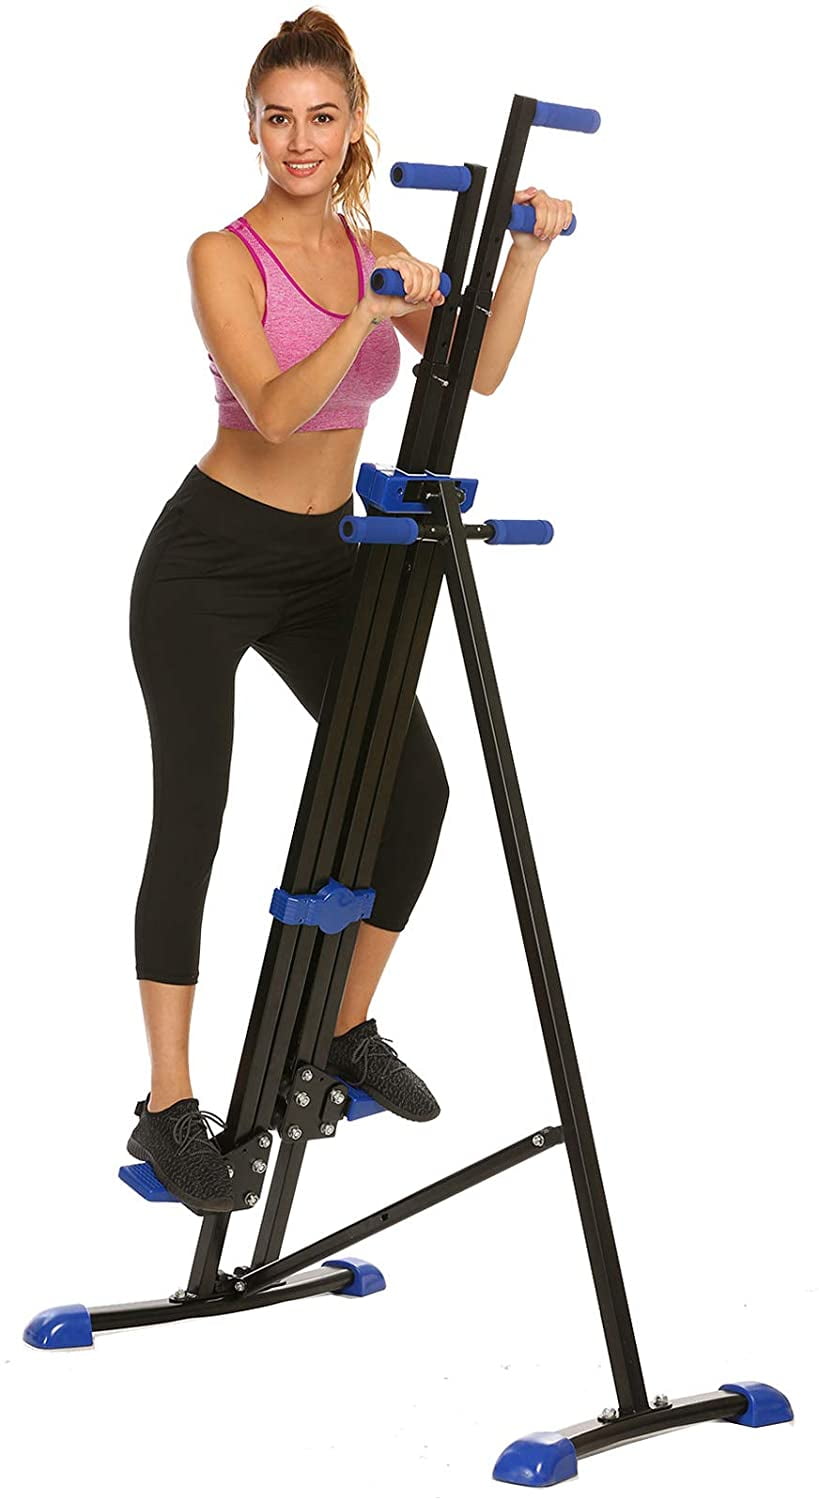 NEW Vertical Climber Machine Exercise Stepper Maxi Cardio Workout Fitness Gym 